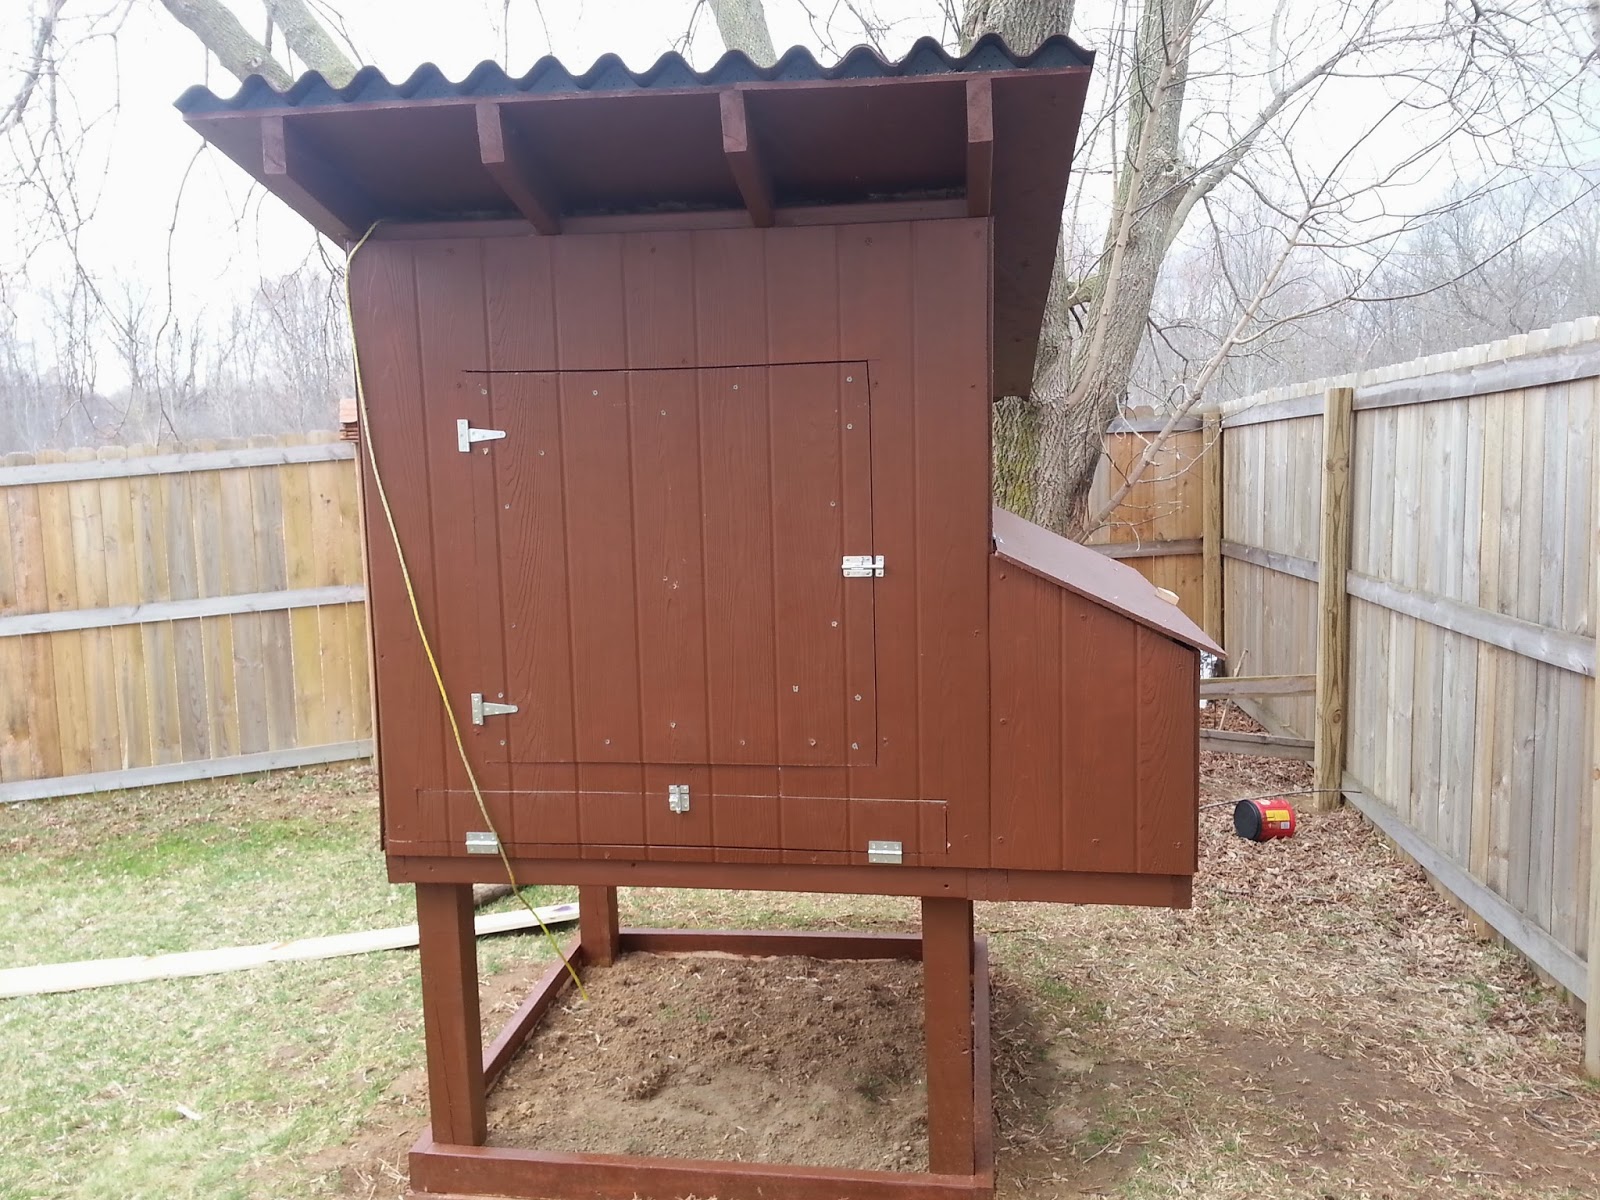 How to Build the Easy to Clean Backyard Chicken Coop - Part One ...